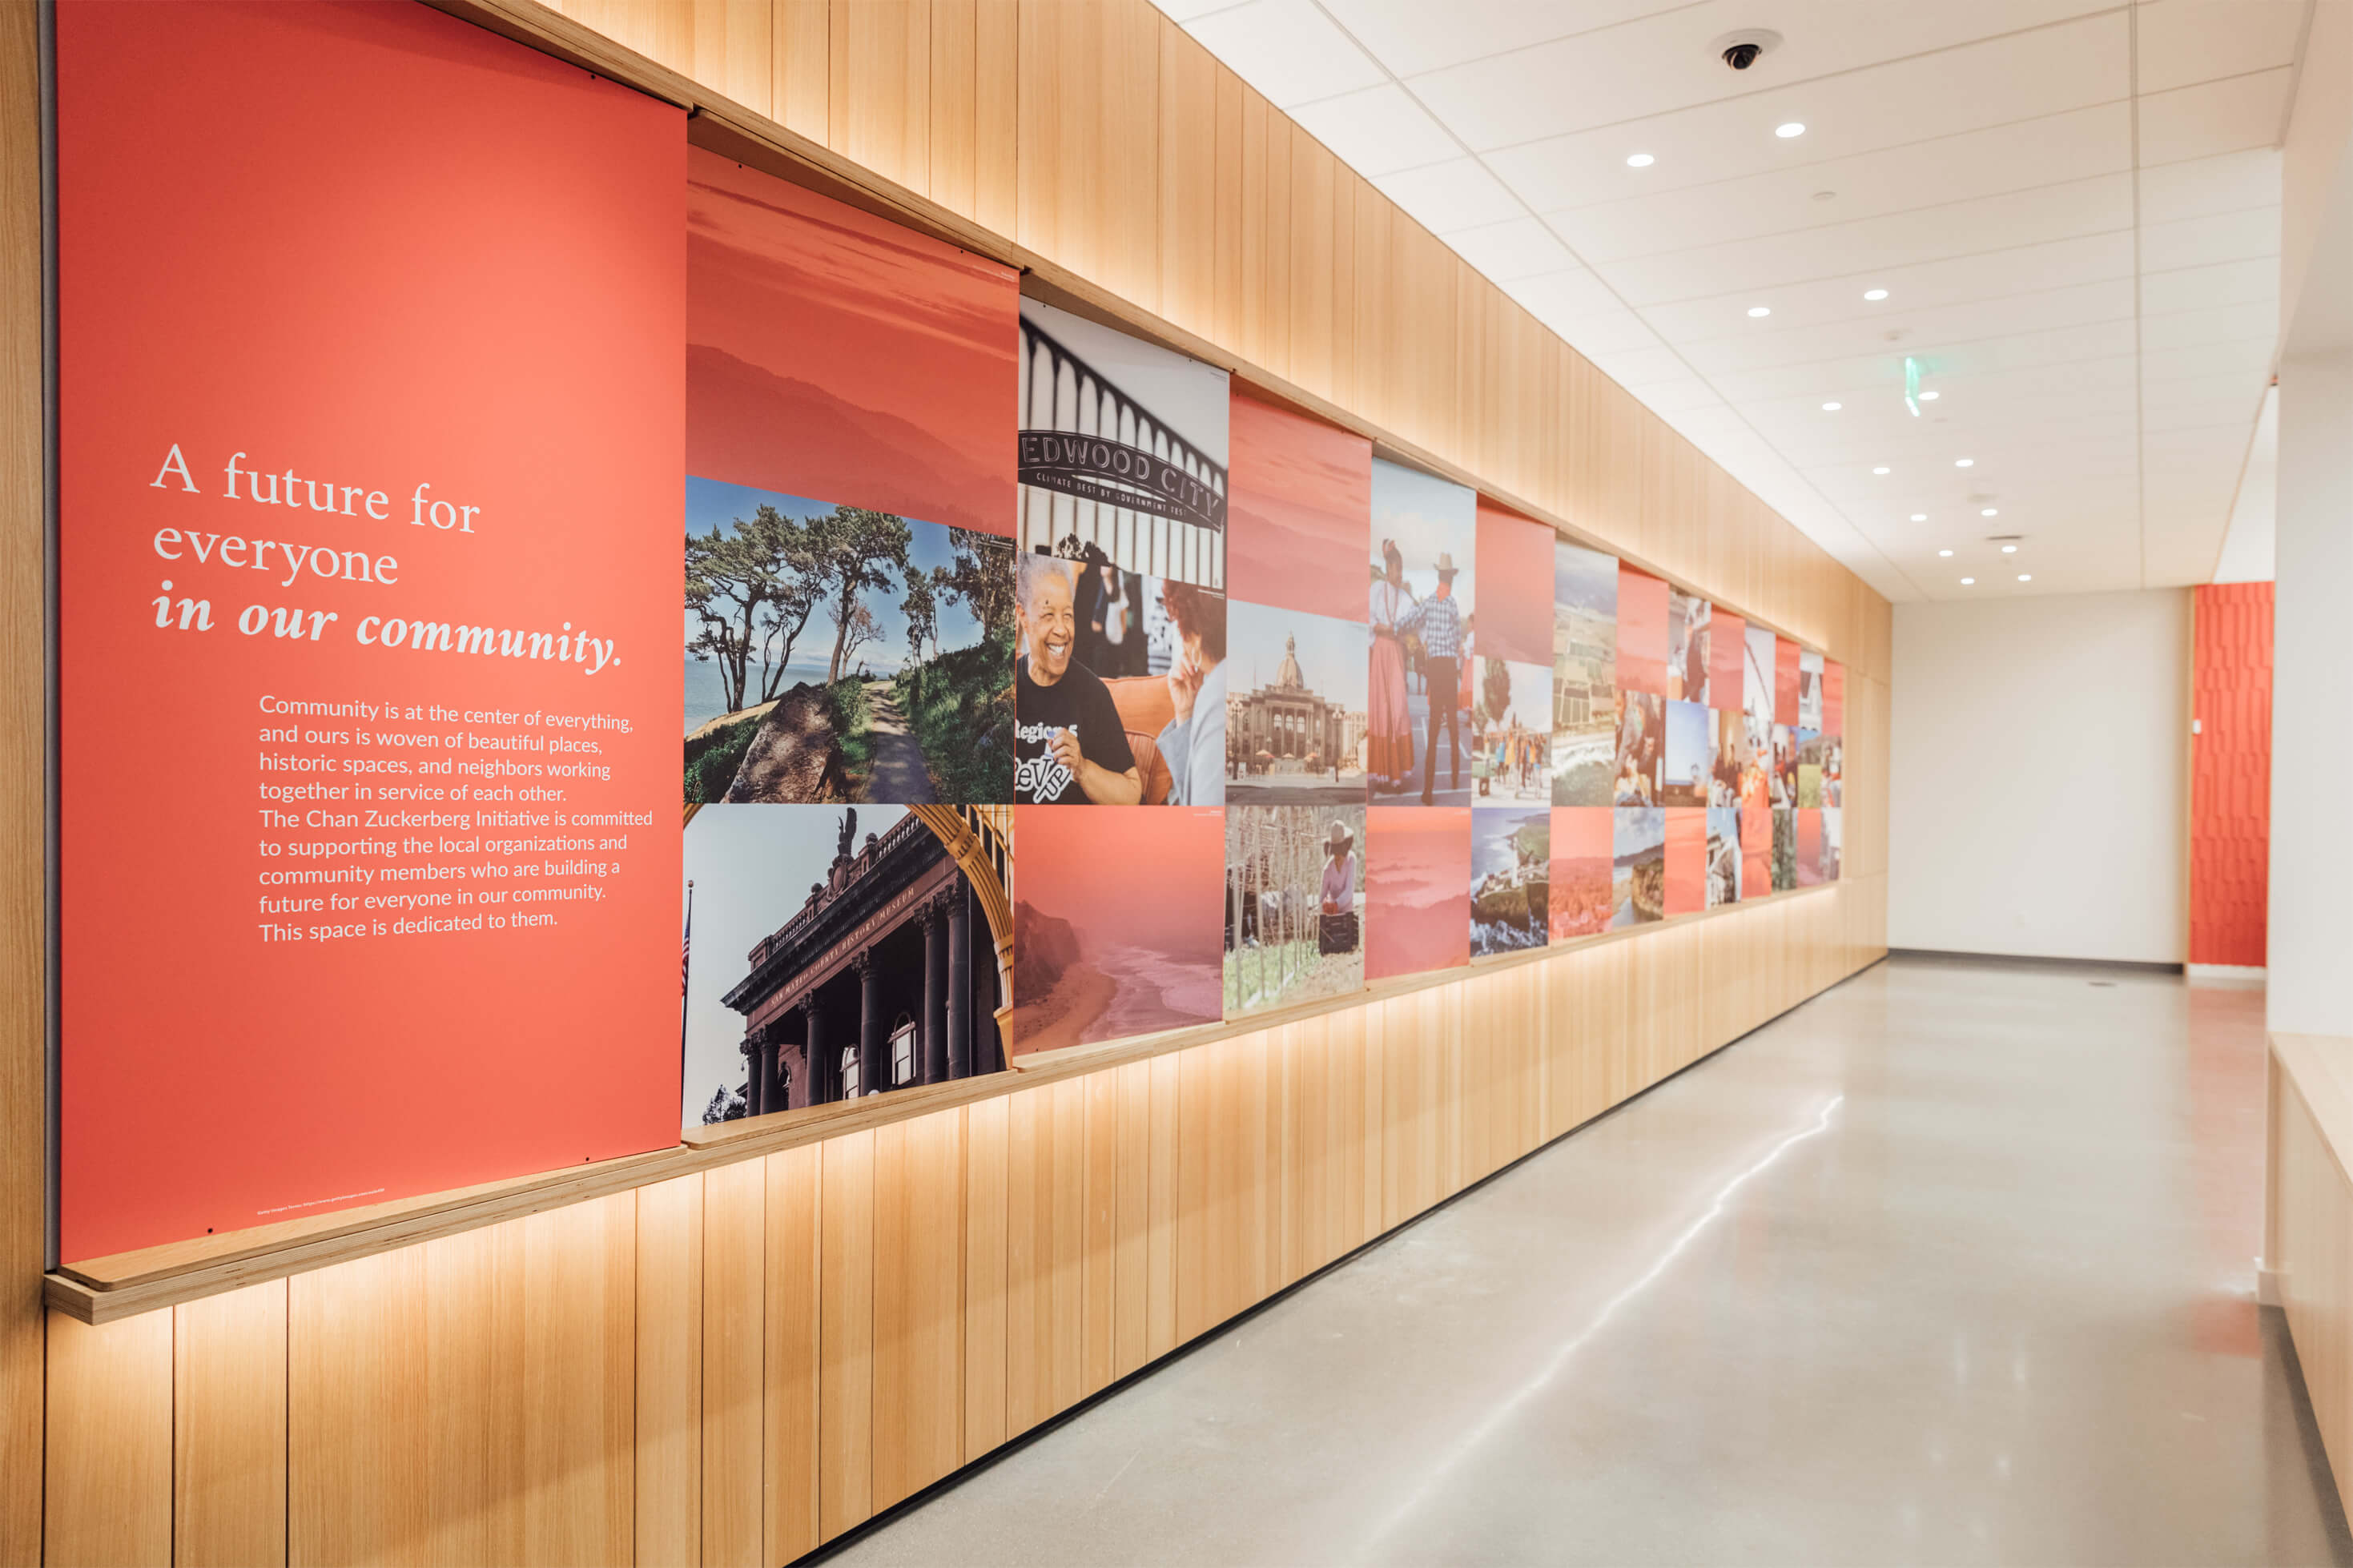 Photo of CZI Community Space, showing long wall with checkered images of people, buildings, and coastal scenery, and a dedication to "A future for everyone in our community."